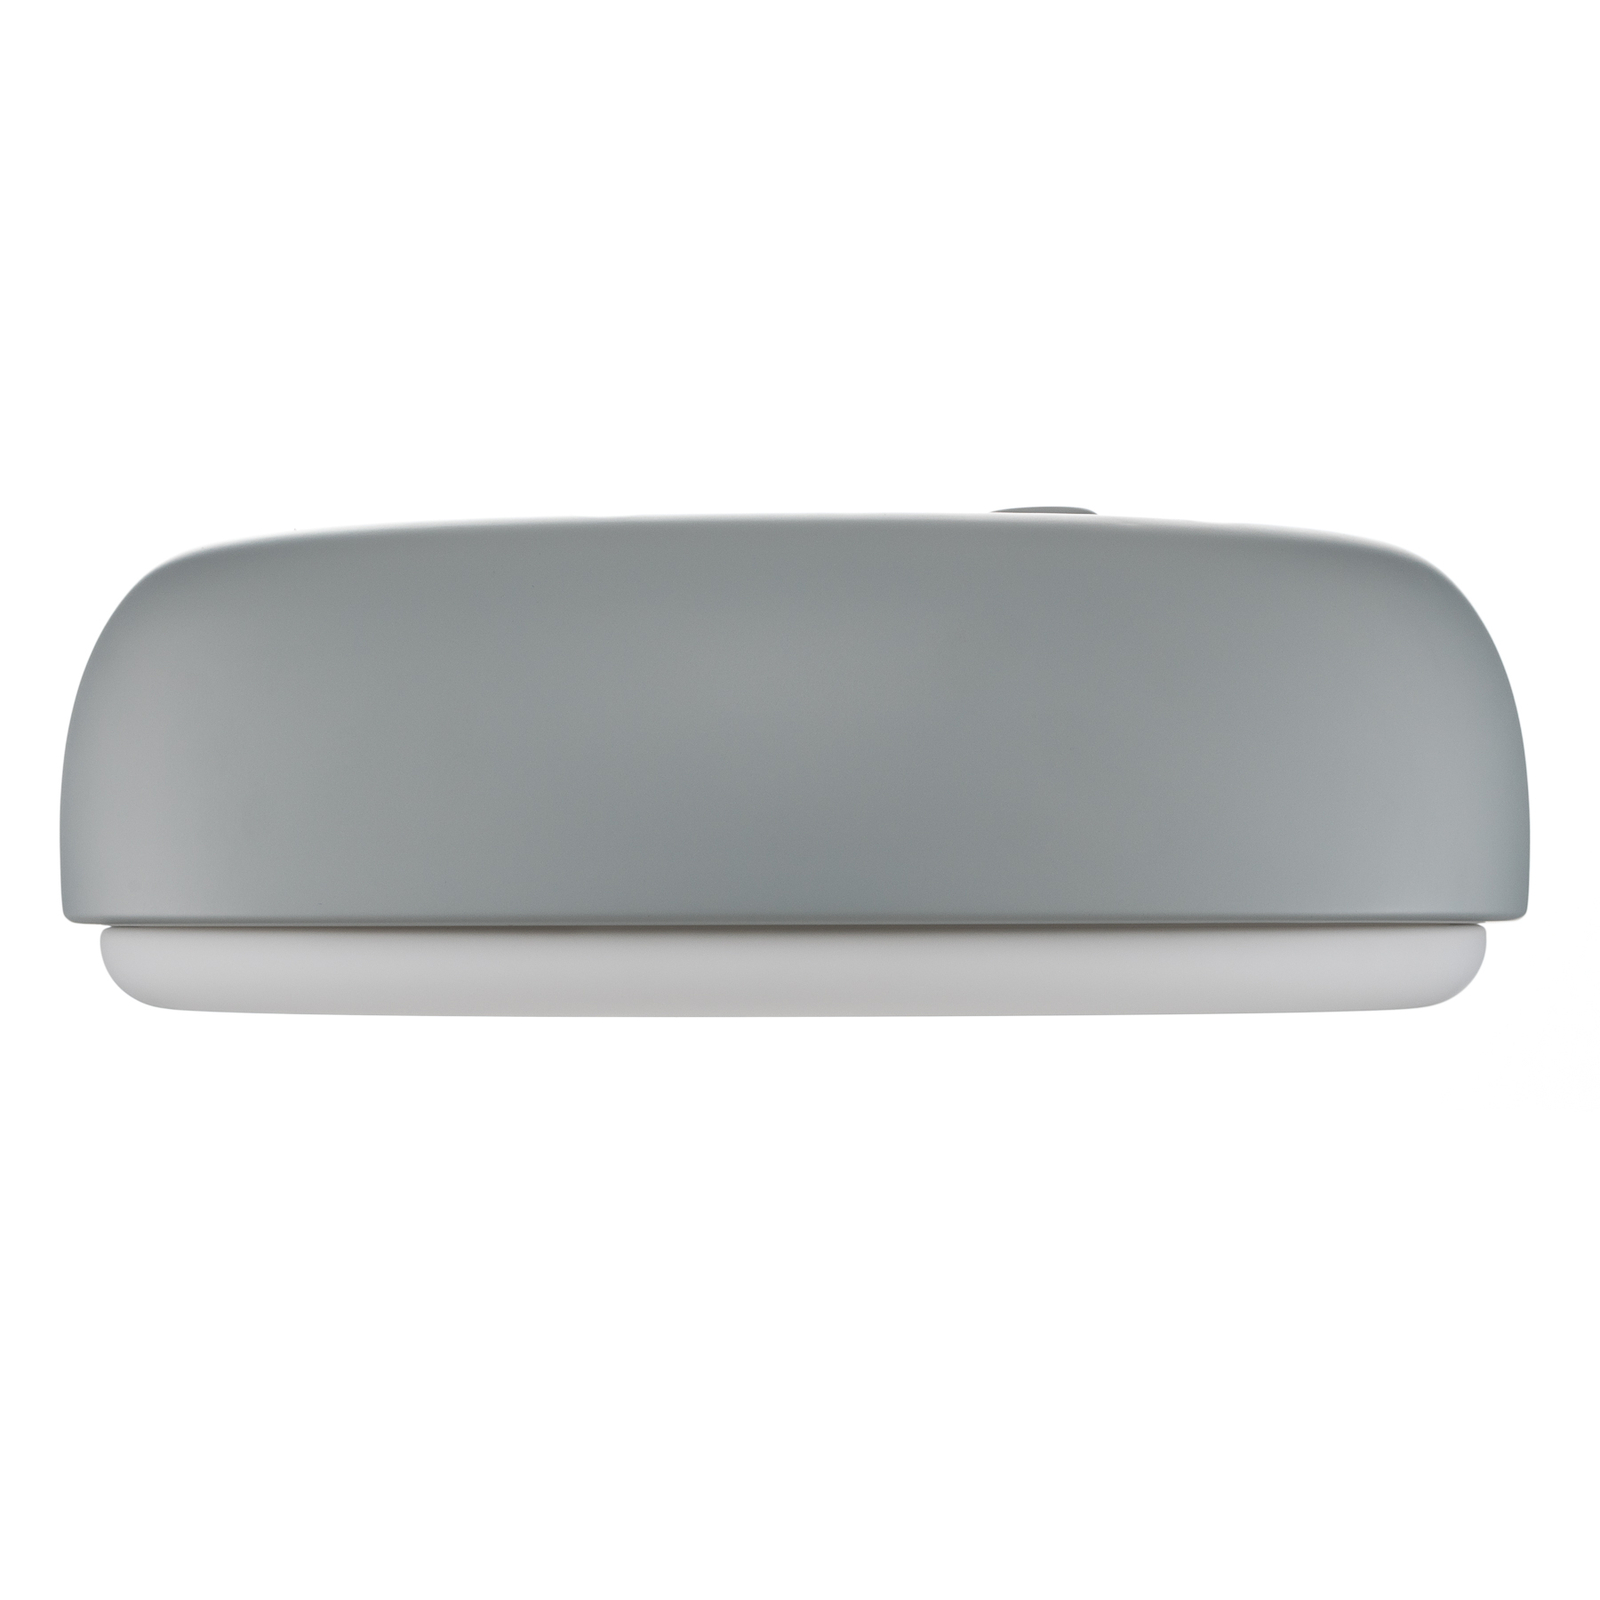 Northern Over Me ceiling light, pale blue 40 cm